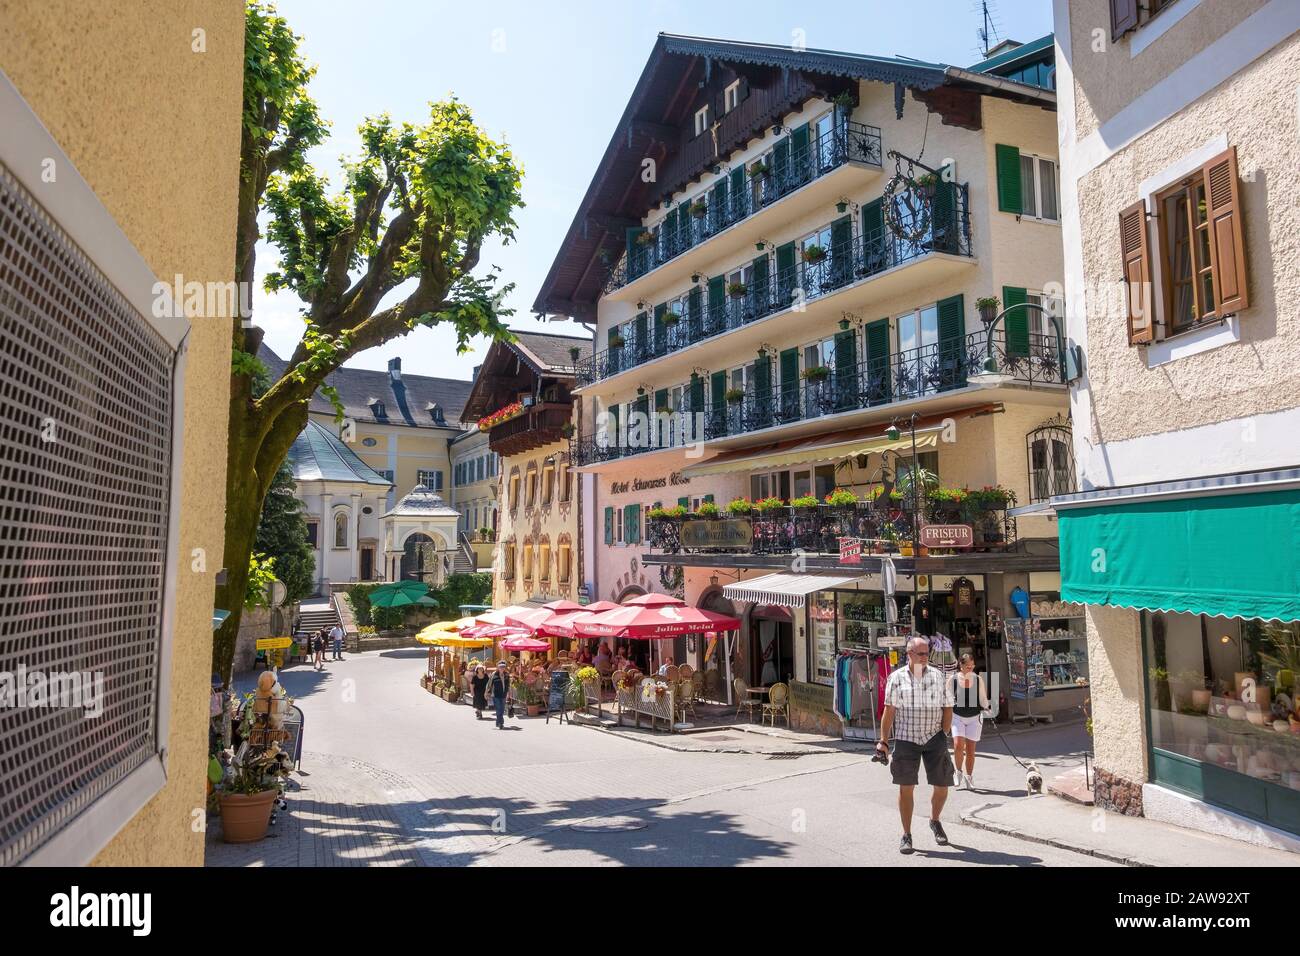 St. Wolfgang, Austria - June 23, 2014: Hotel Schwarzes Roessl at the famous lake Wolfgangsee. Popular travel destination within Austria. Stock Photo